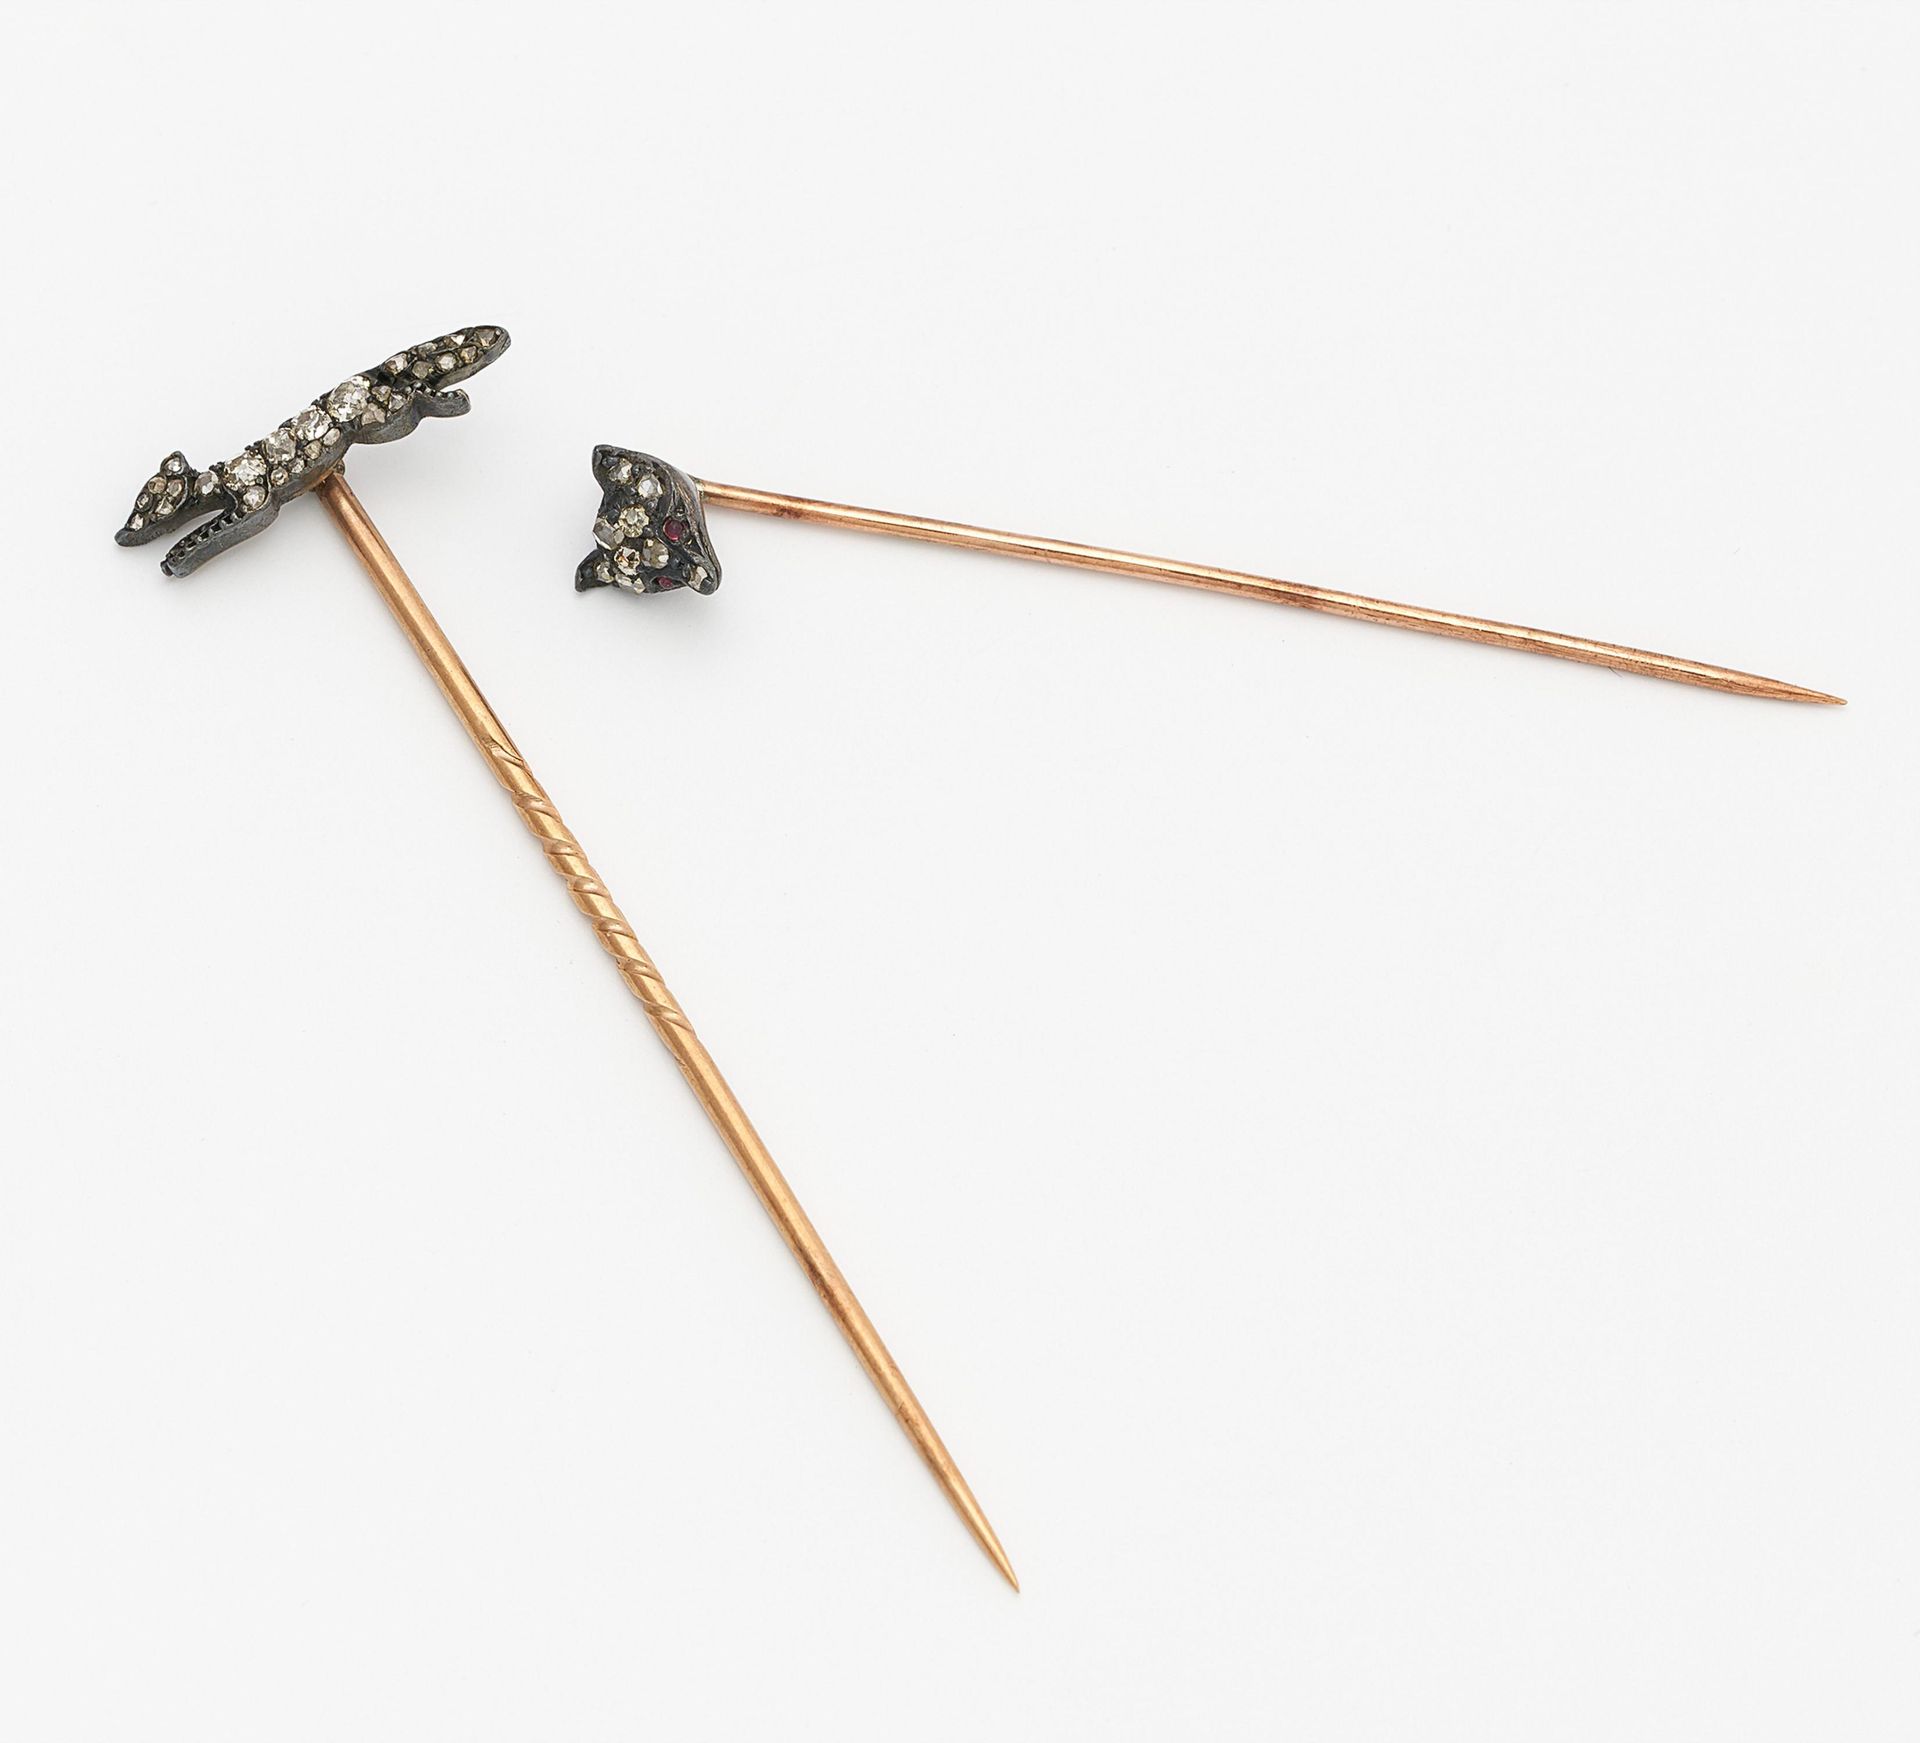 Null CONVOLUTE: TWO CRAWATTEN NEEDLES. 

Material: 333/- rose gold, silver black&hellip;